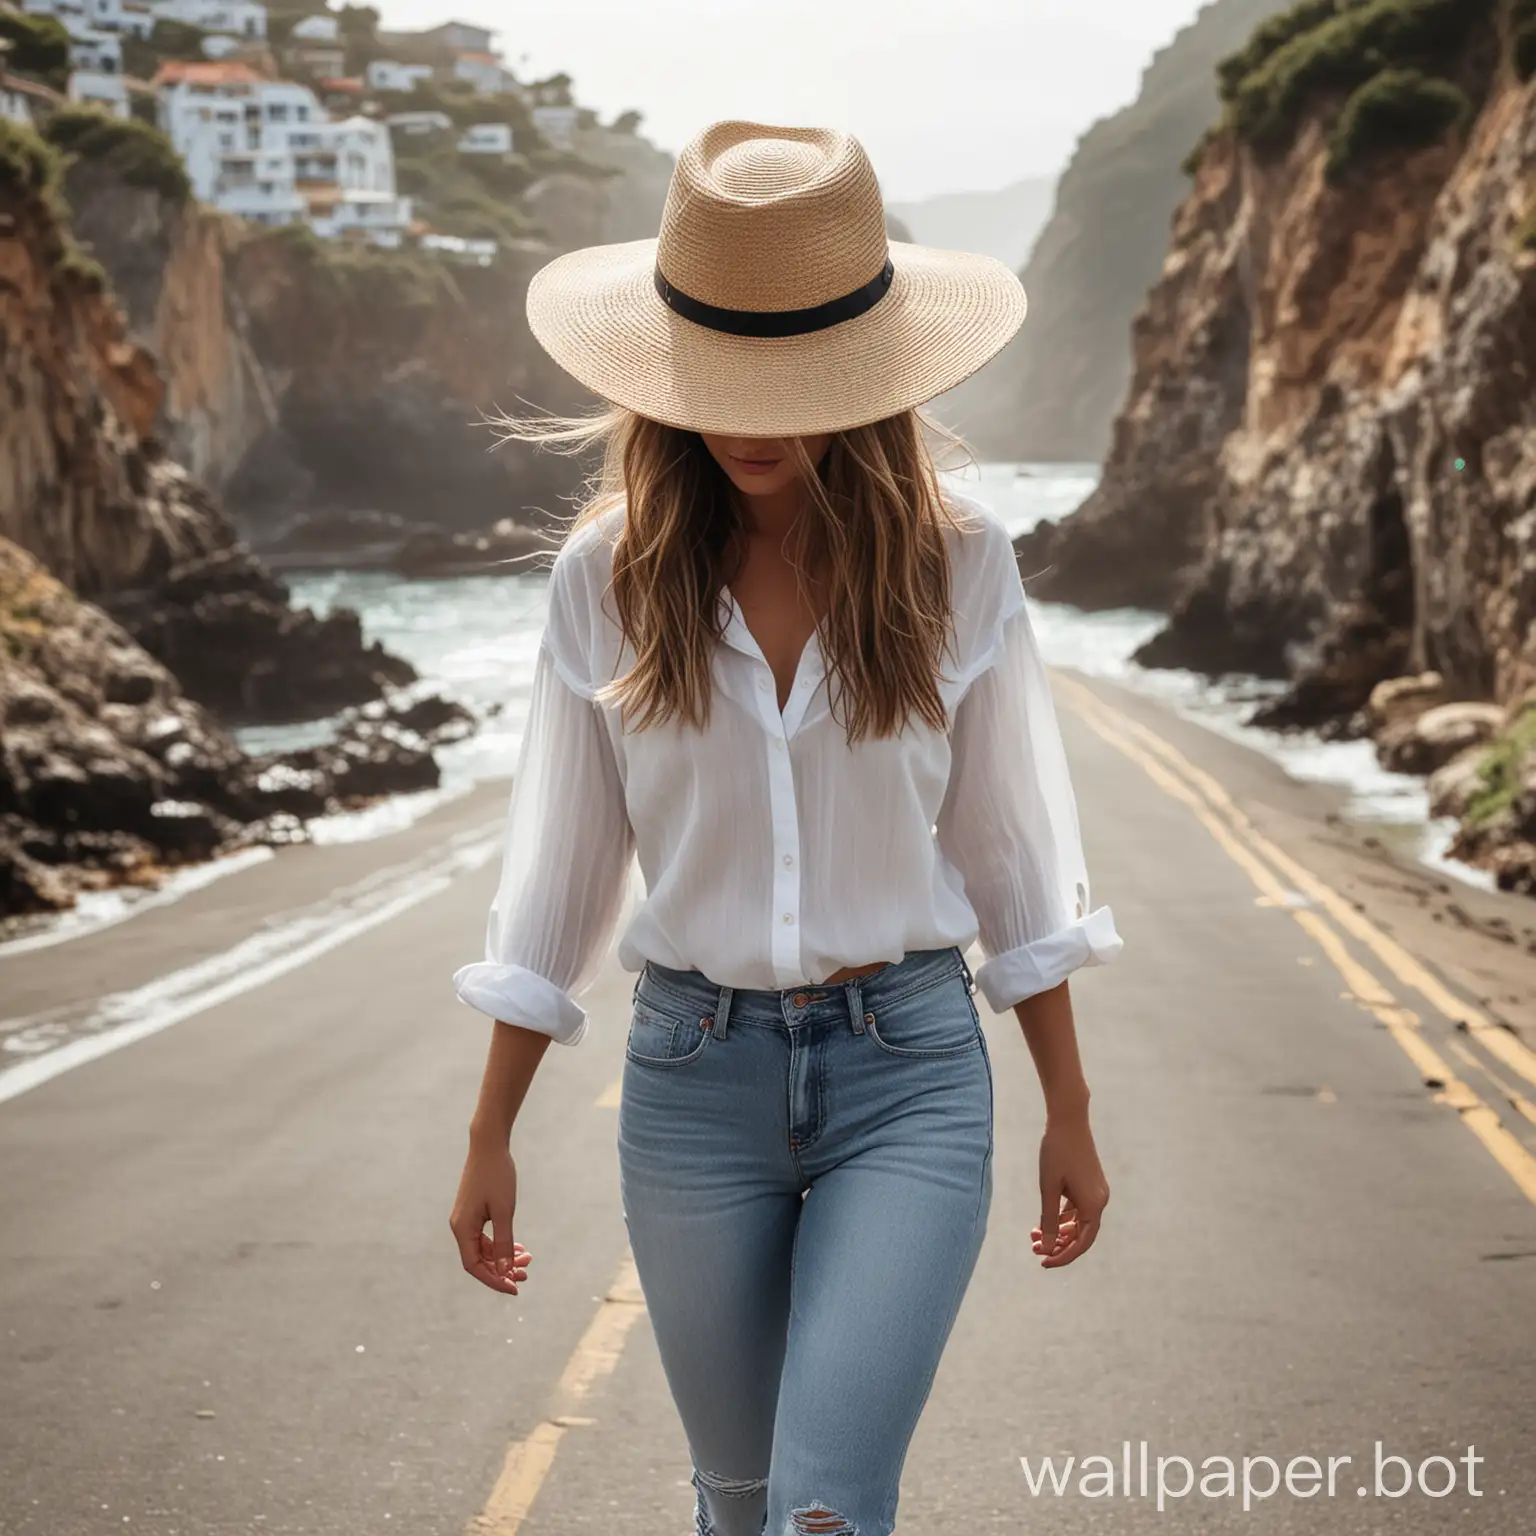 Girl with wide rim mesh hat wearing a white shirt and faded short jeans walking down a small street overlooking a seaside cove on a windy day